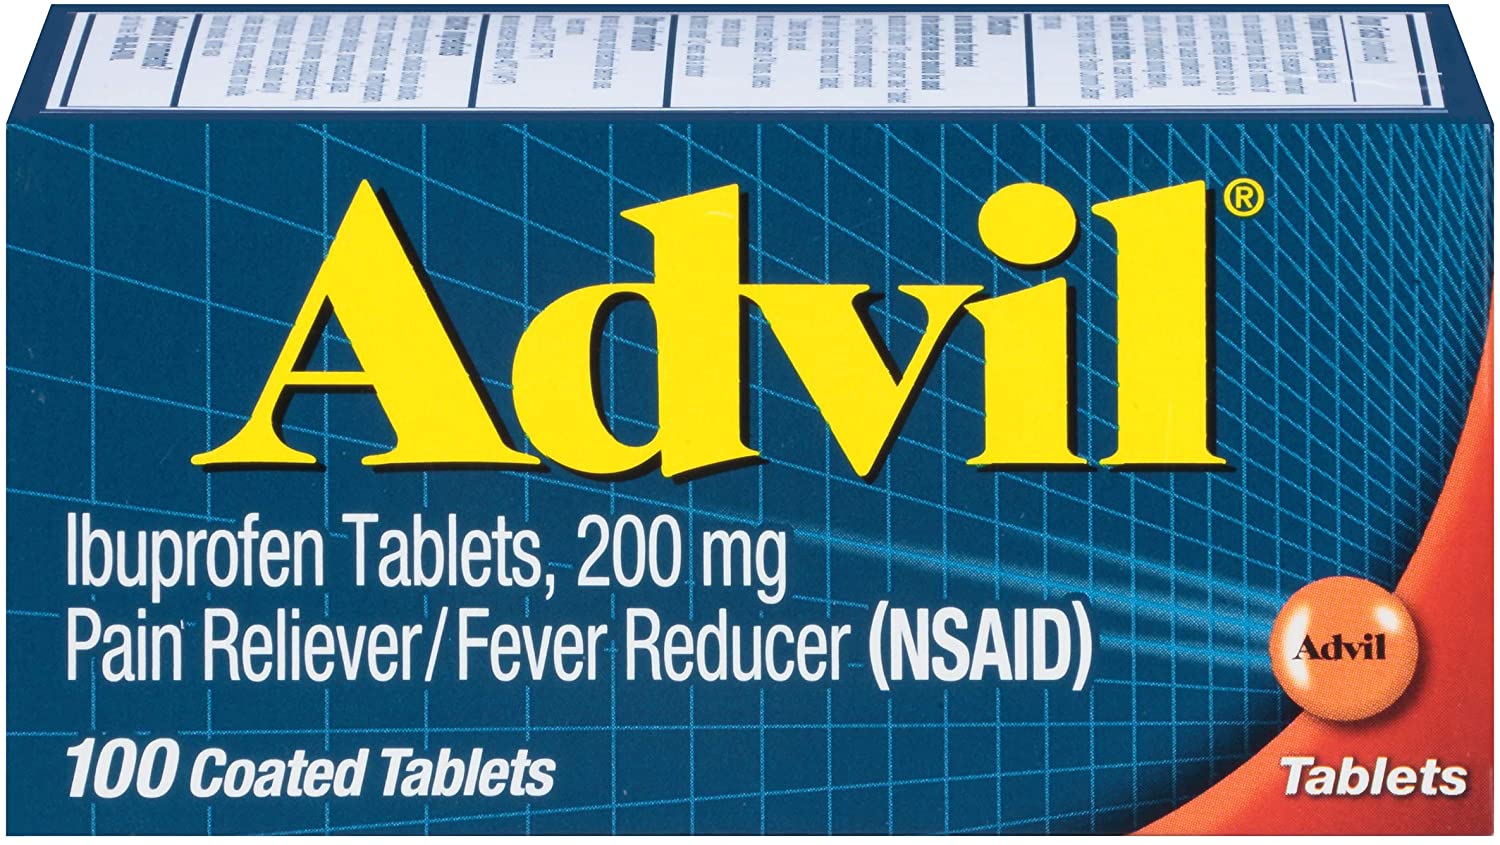 100-Ct Advil Pain Ibuprofen Reliever and Fever Reducer Tablets $6.29 w/ S&S + Free Shipping w/ Prime or on $25+